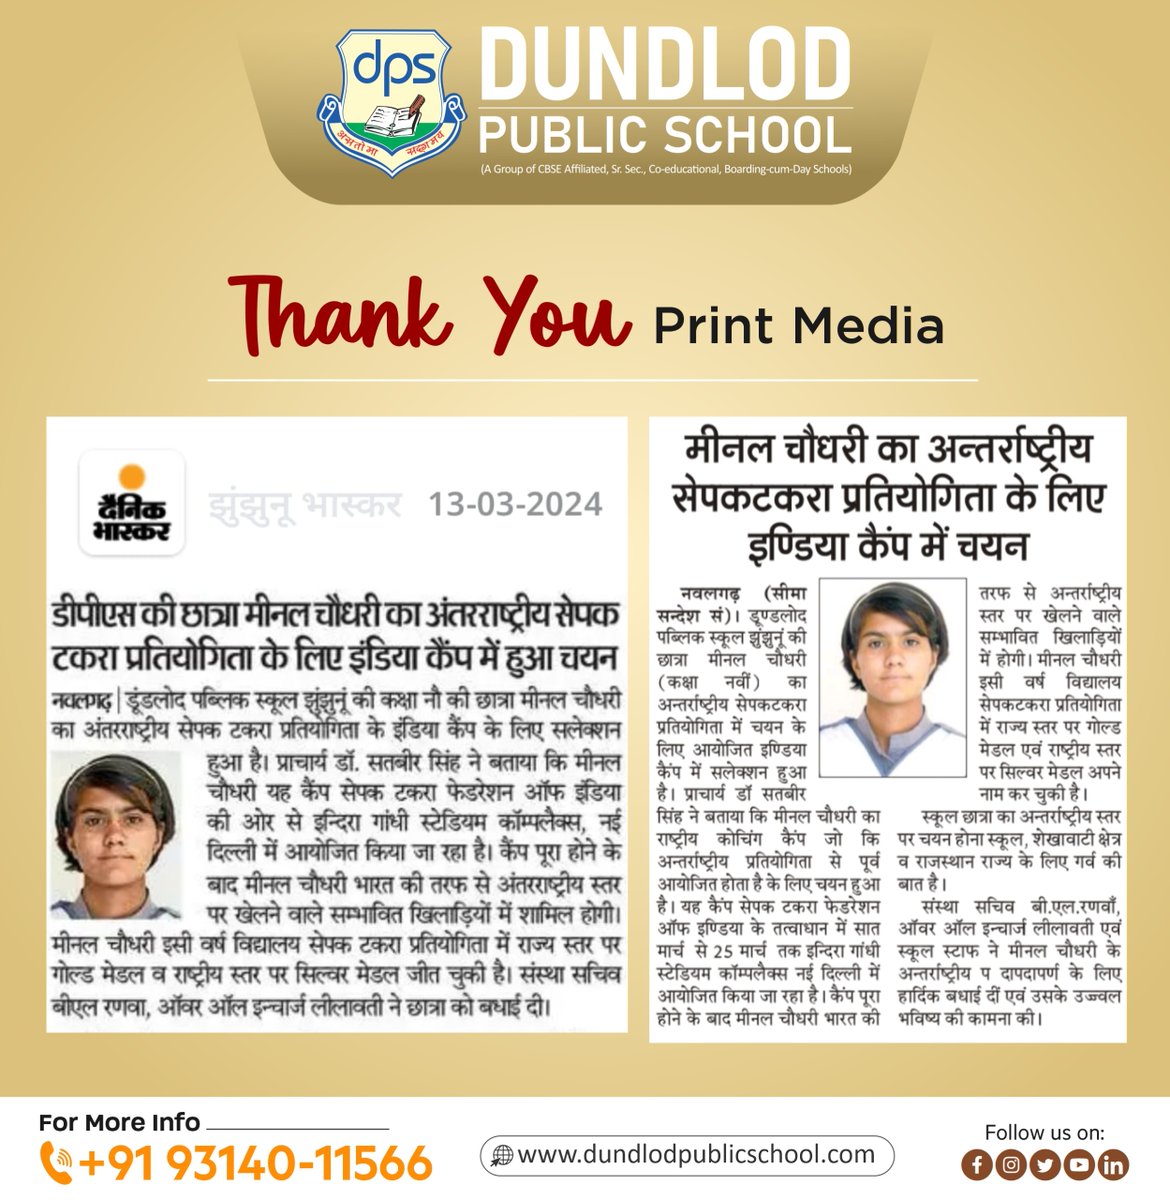 📌Thank You Print Media 📝📝

📚🚀 DPS student Meenal Choudhary selected in India Camp for International Sepak Takraw Competition. 🎓👩‍🏫

#DundlodPublicSchool #DPS #StudentAchievement #SepakTakraw #InternationalCompetition #IndiaCamp #SportsSuccess #AthleteAchievement #ProudMoment